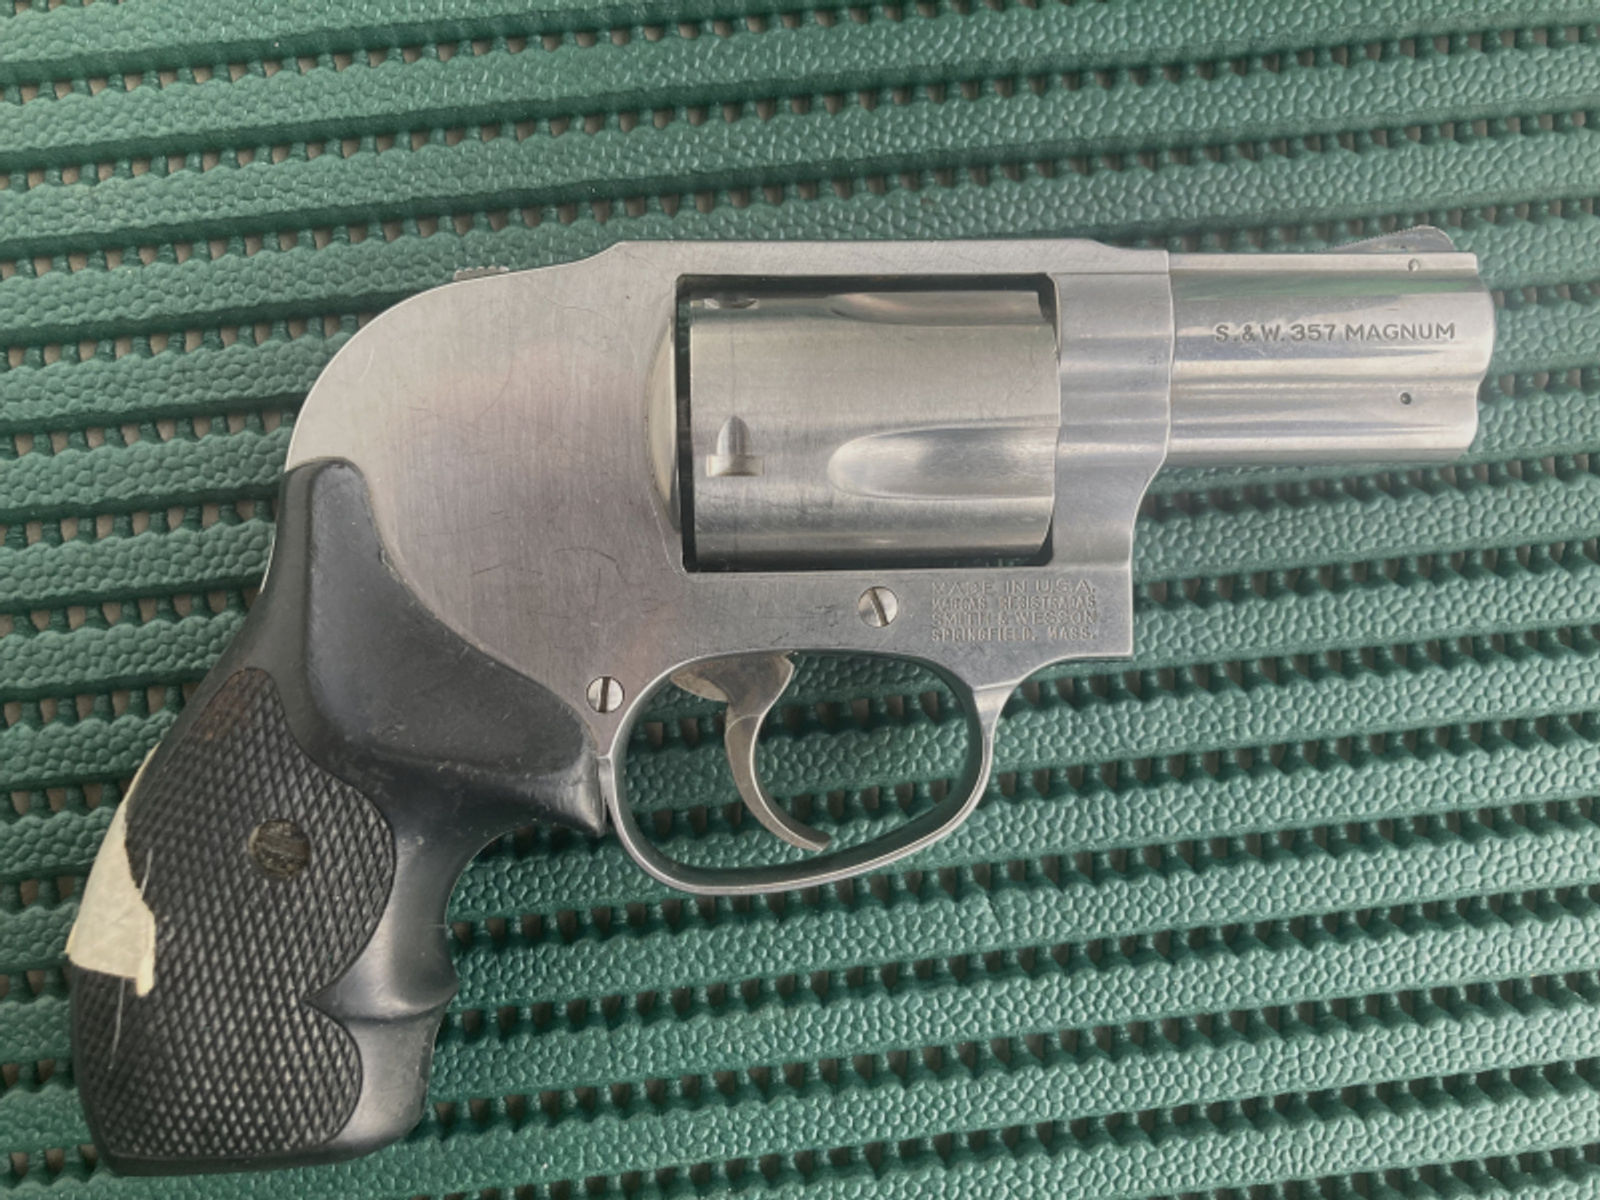 Smith&Wesson Revolver 357 Magnum, Mod. 649-3, Stainless